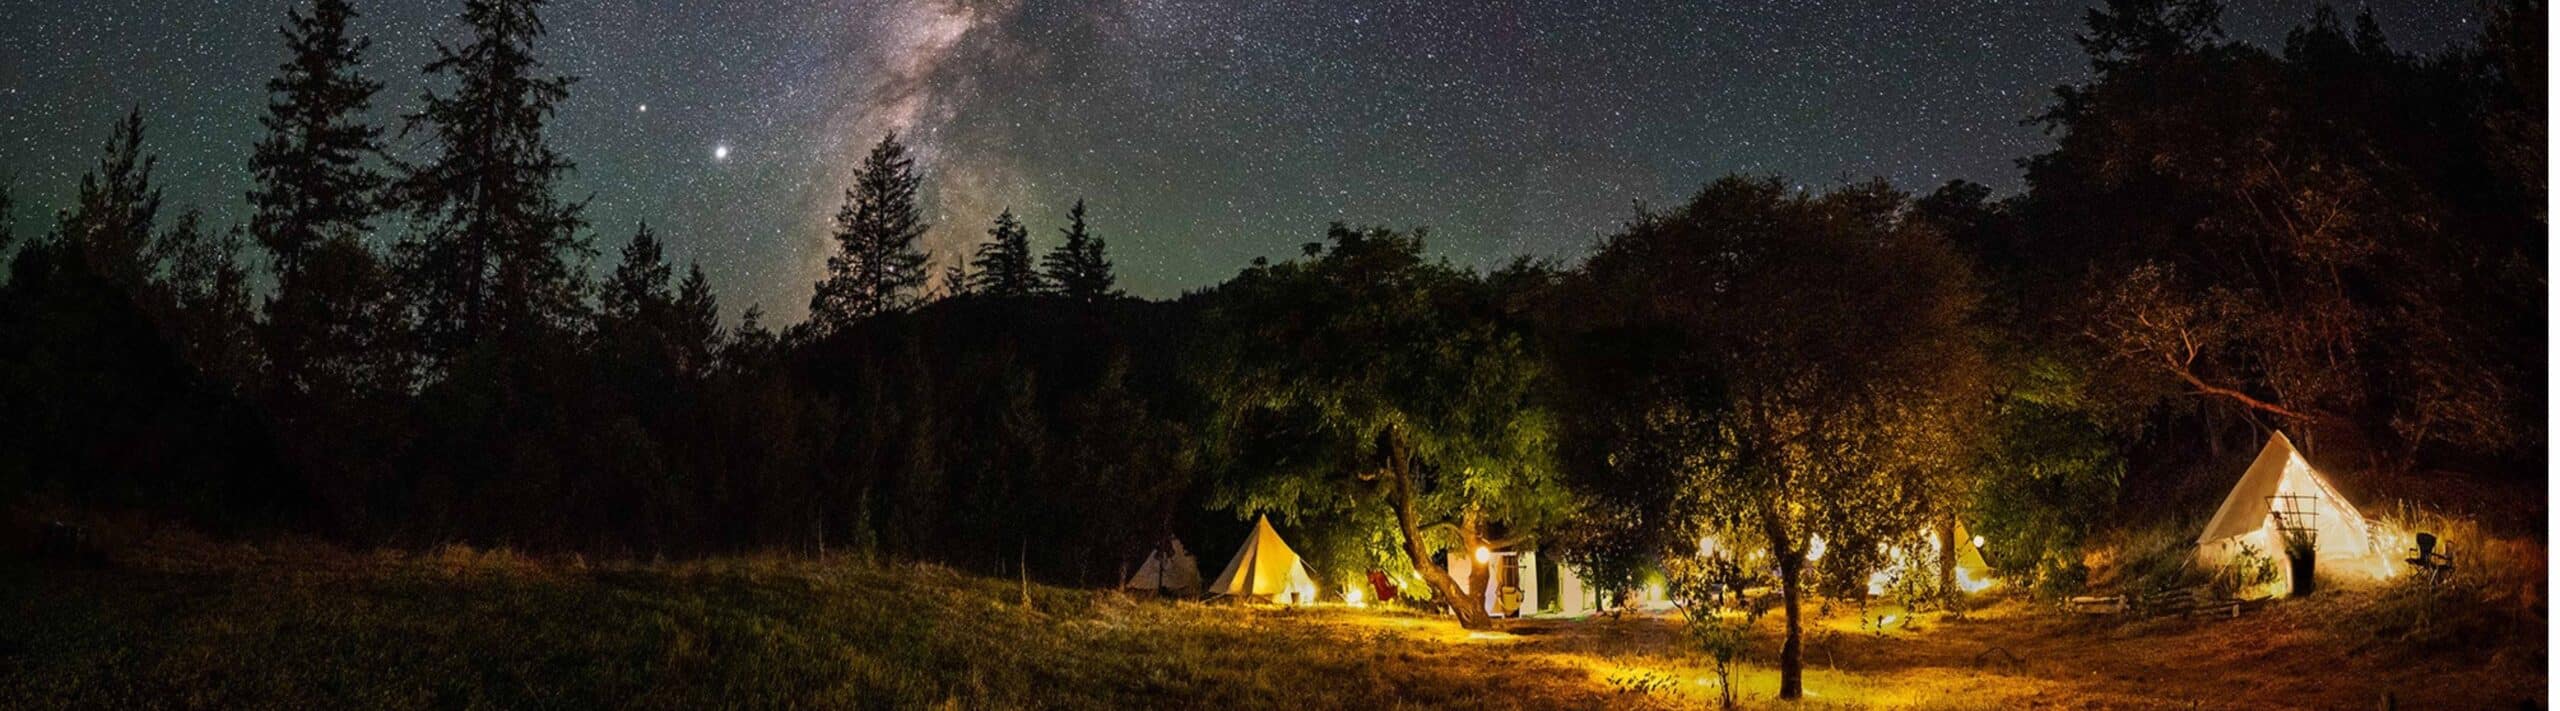 cannabis airbnb view at night